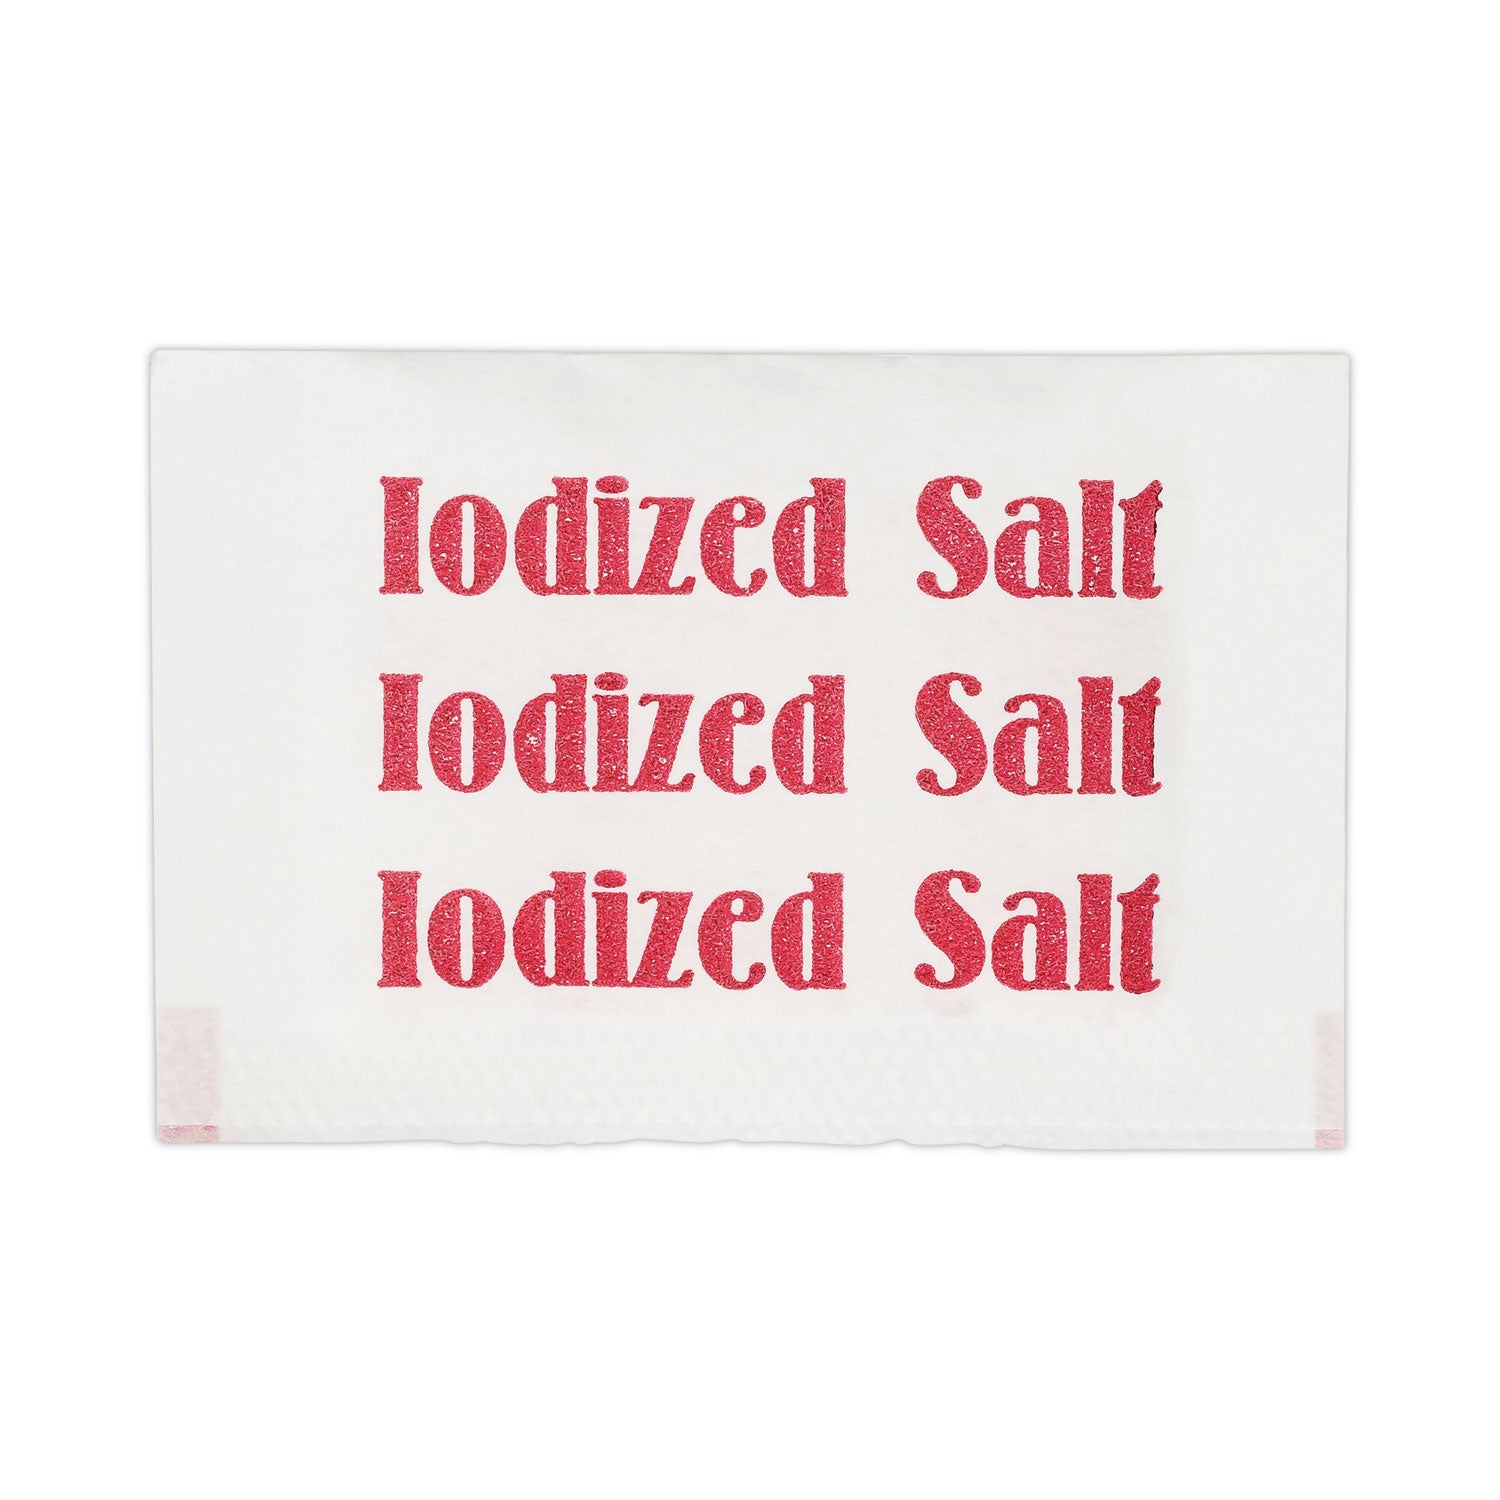 iodized-salt-packets-075-g-packet-3000-box_ofx15261 - 1